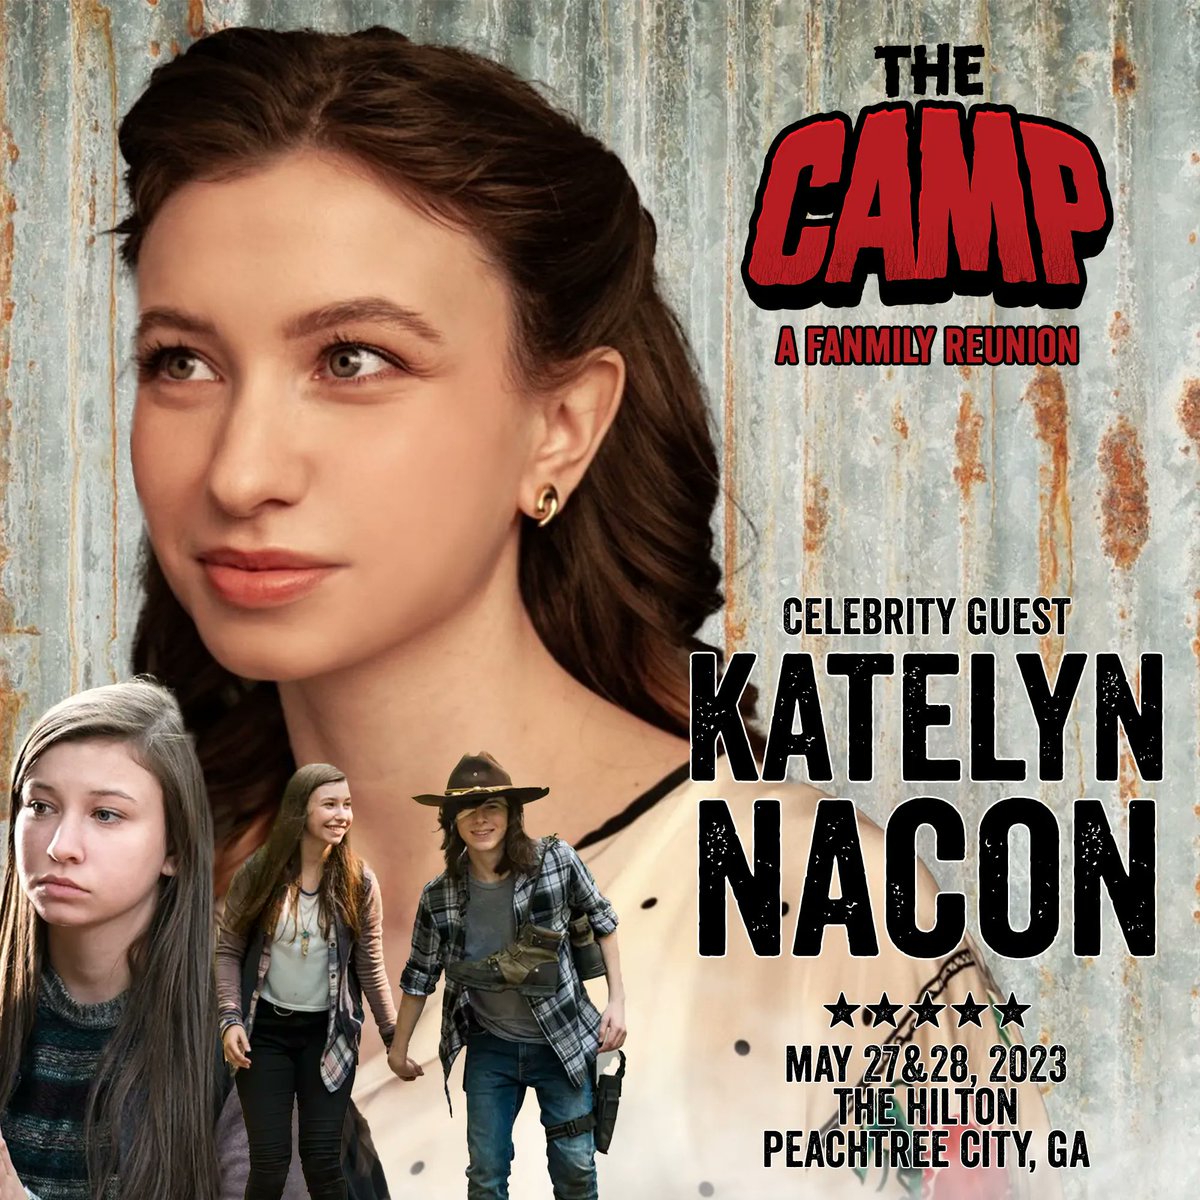 The Camp would like to welcome @katelynnacon (Enid on The Walking Dead) back to The Camp! Welcome Katelyn!